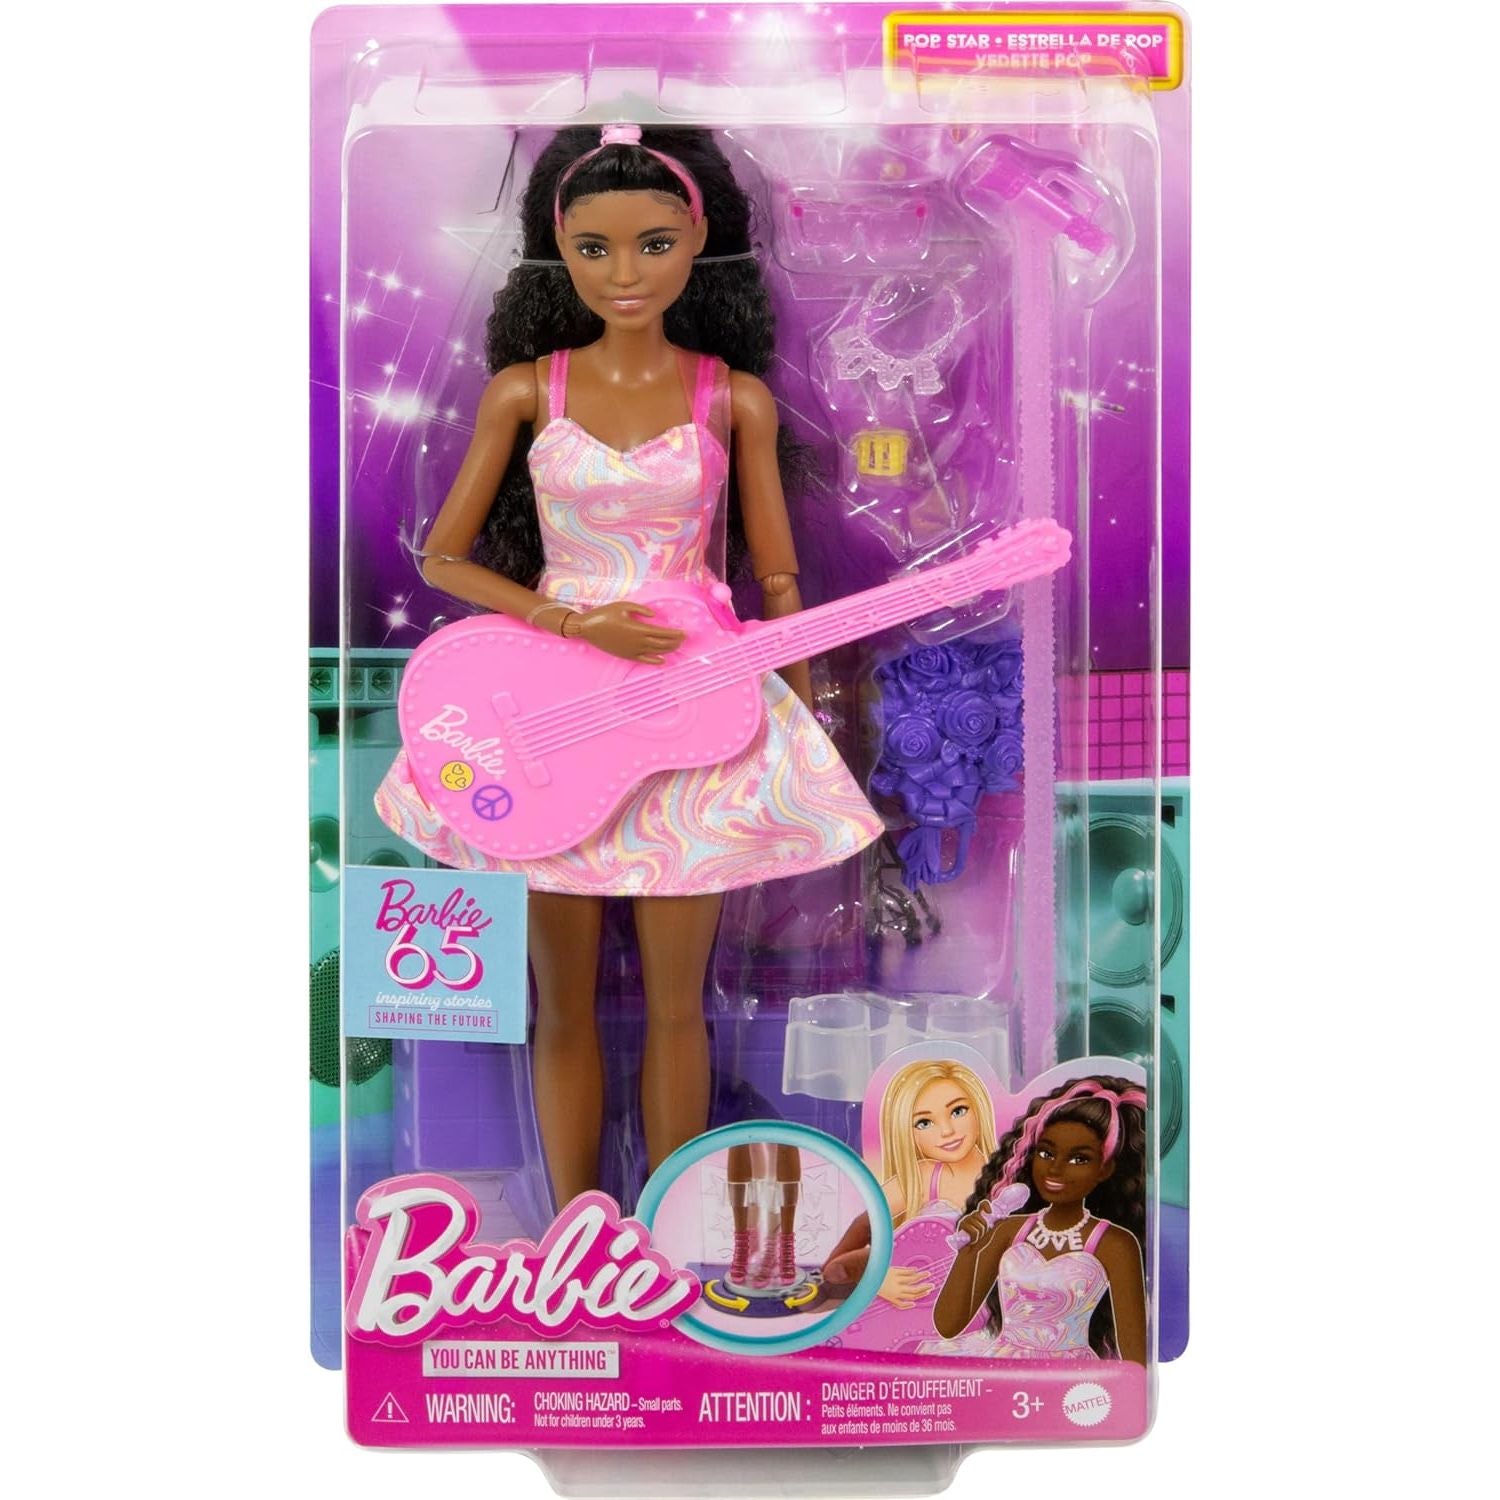 Barbie 65th Anniversary Doll & 10 Accessories, Pop Star Set with Brune ...